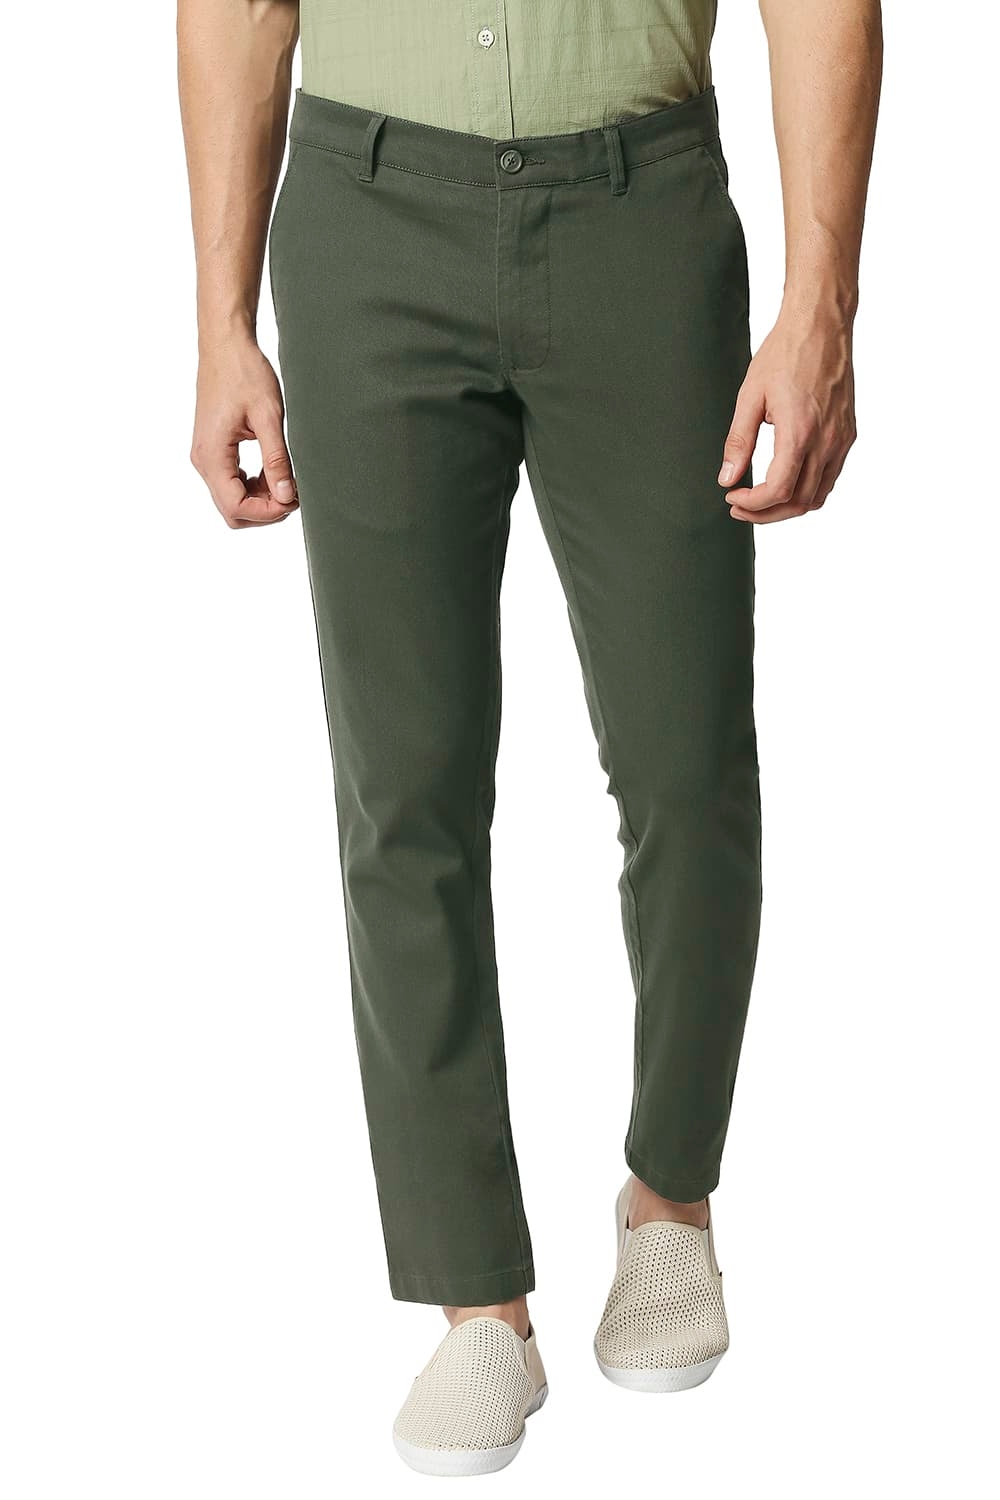 BASICS CASUAL SELF OLIVE COTTON STRETCH TAPERED TROUSERS 